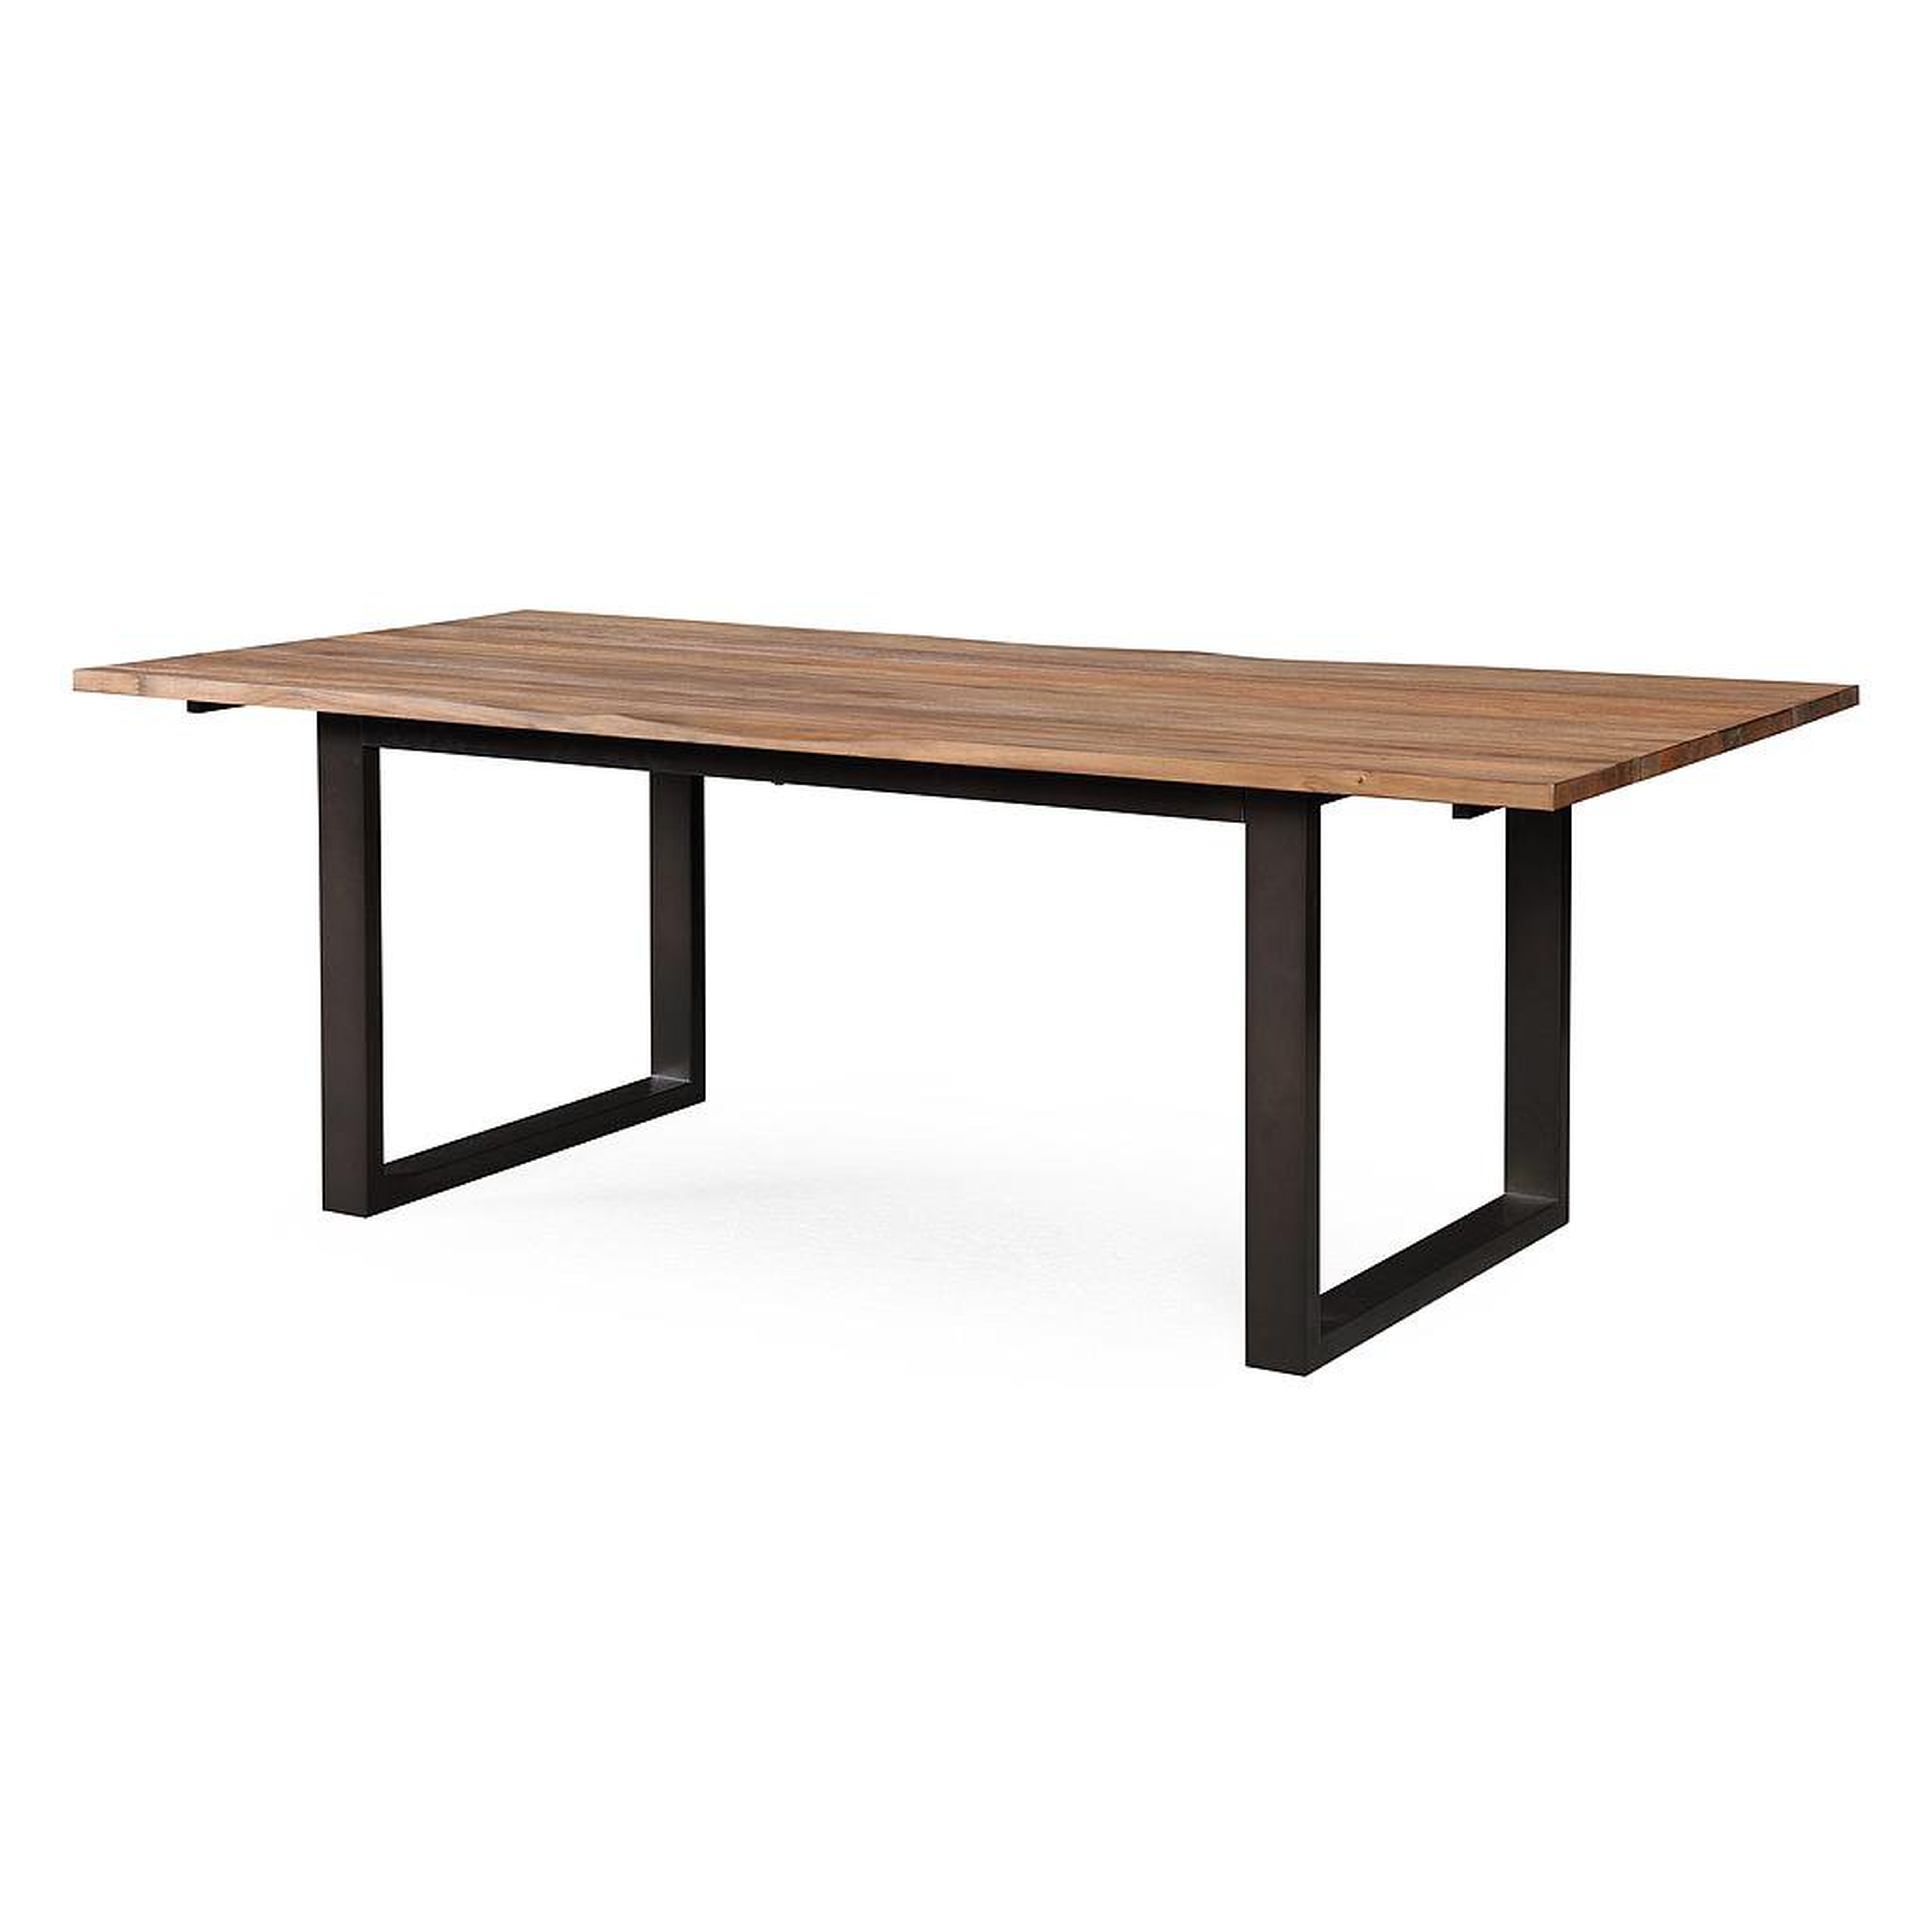 Madelyn Rustic Elm Table - Maren Home